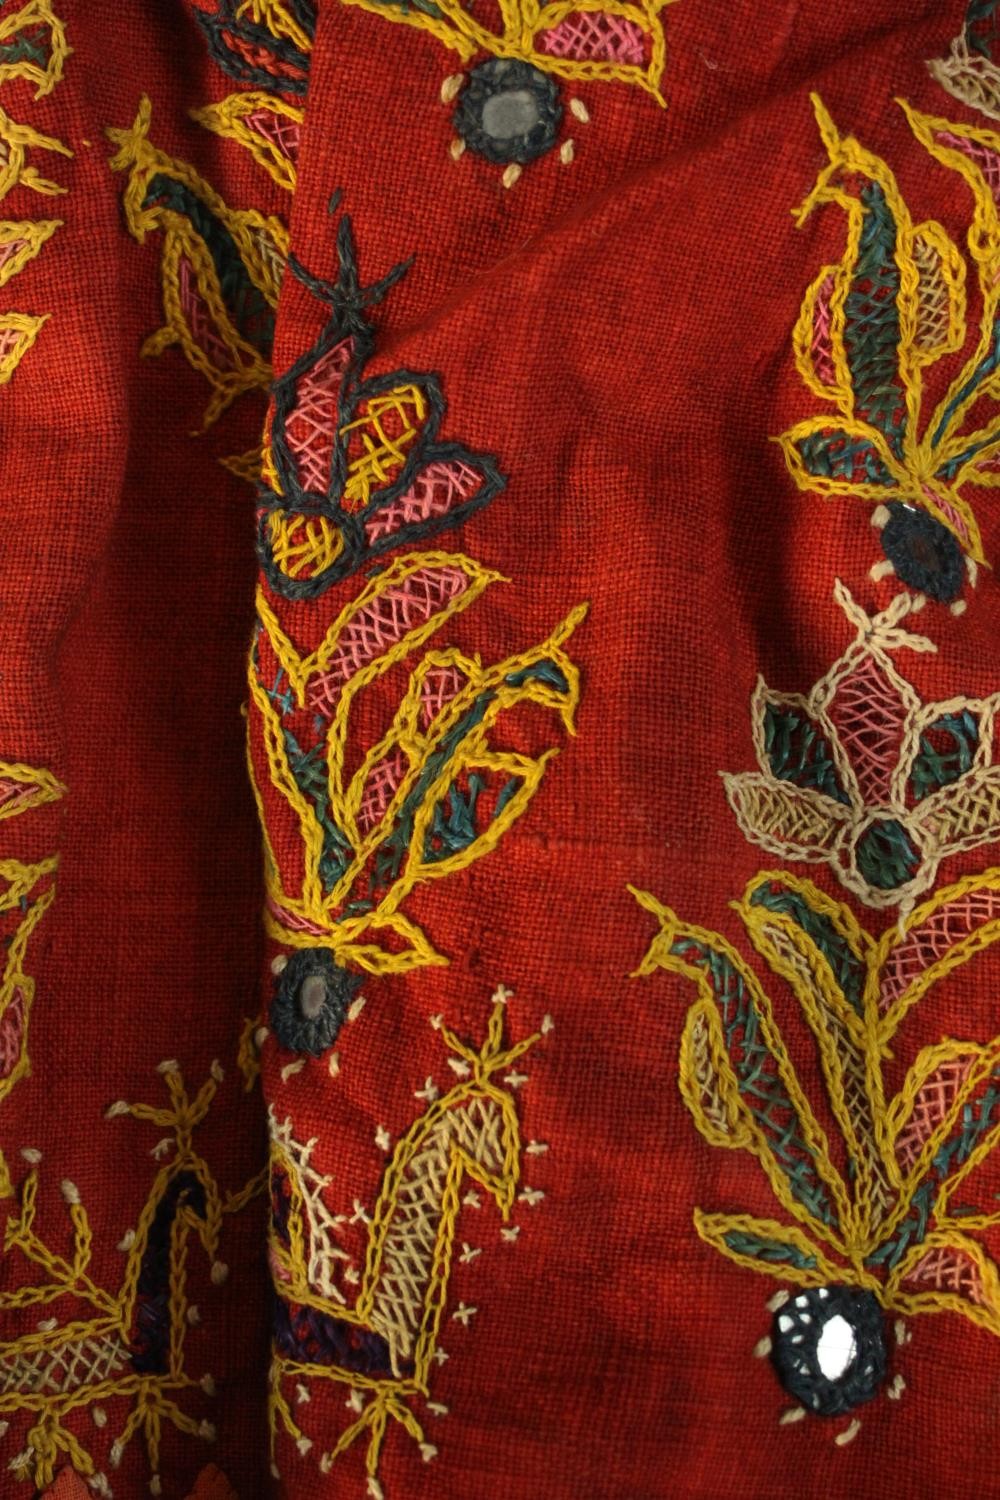 Two 19th century carved and painted Indian dolls in embroidered traditional costumes, the robes with - Image 10 of 12